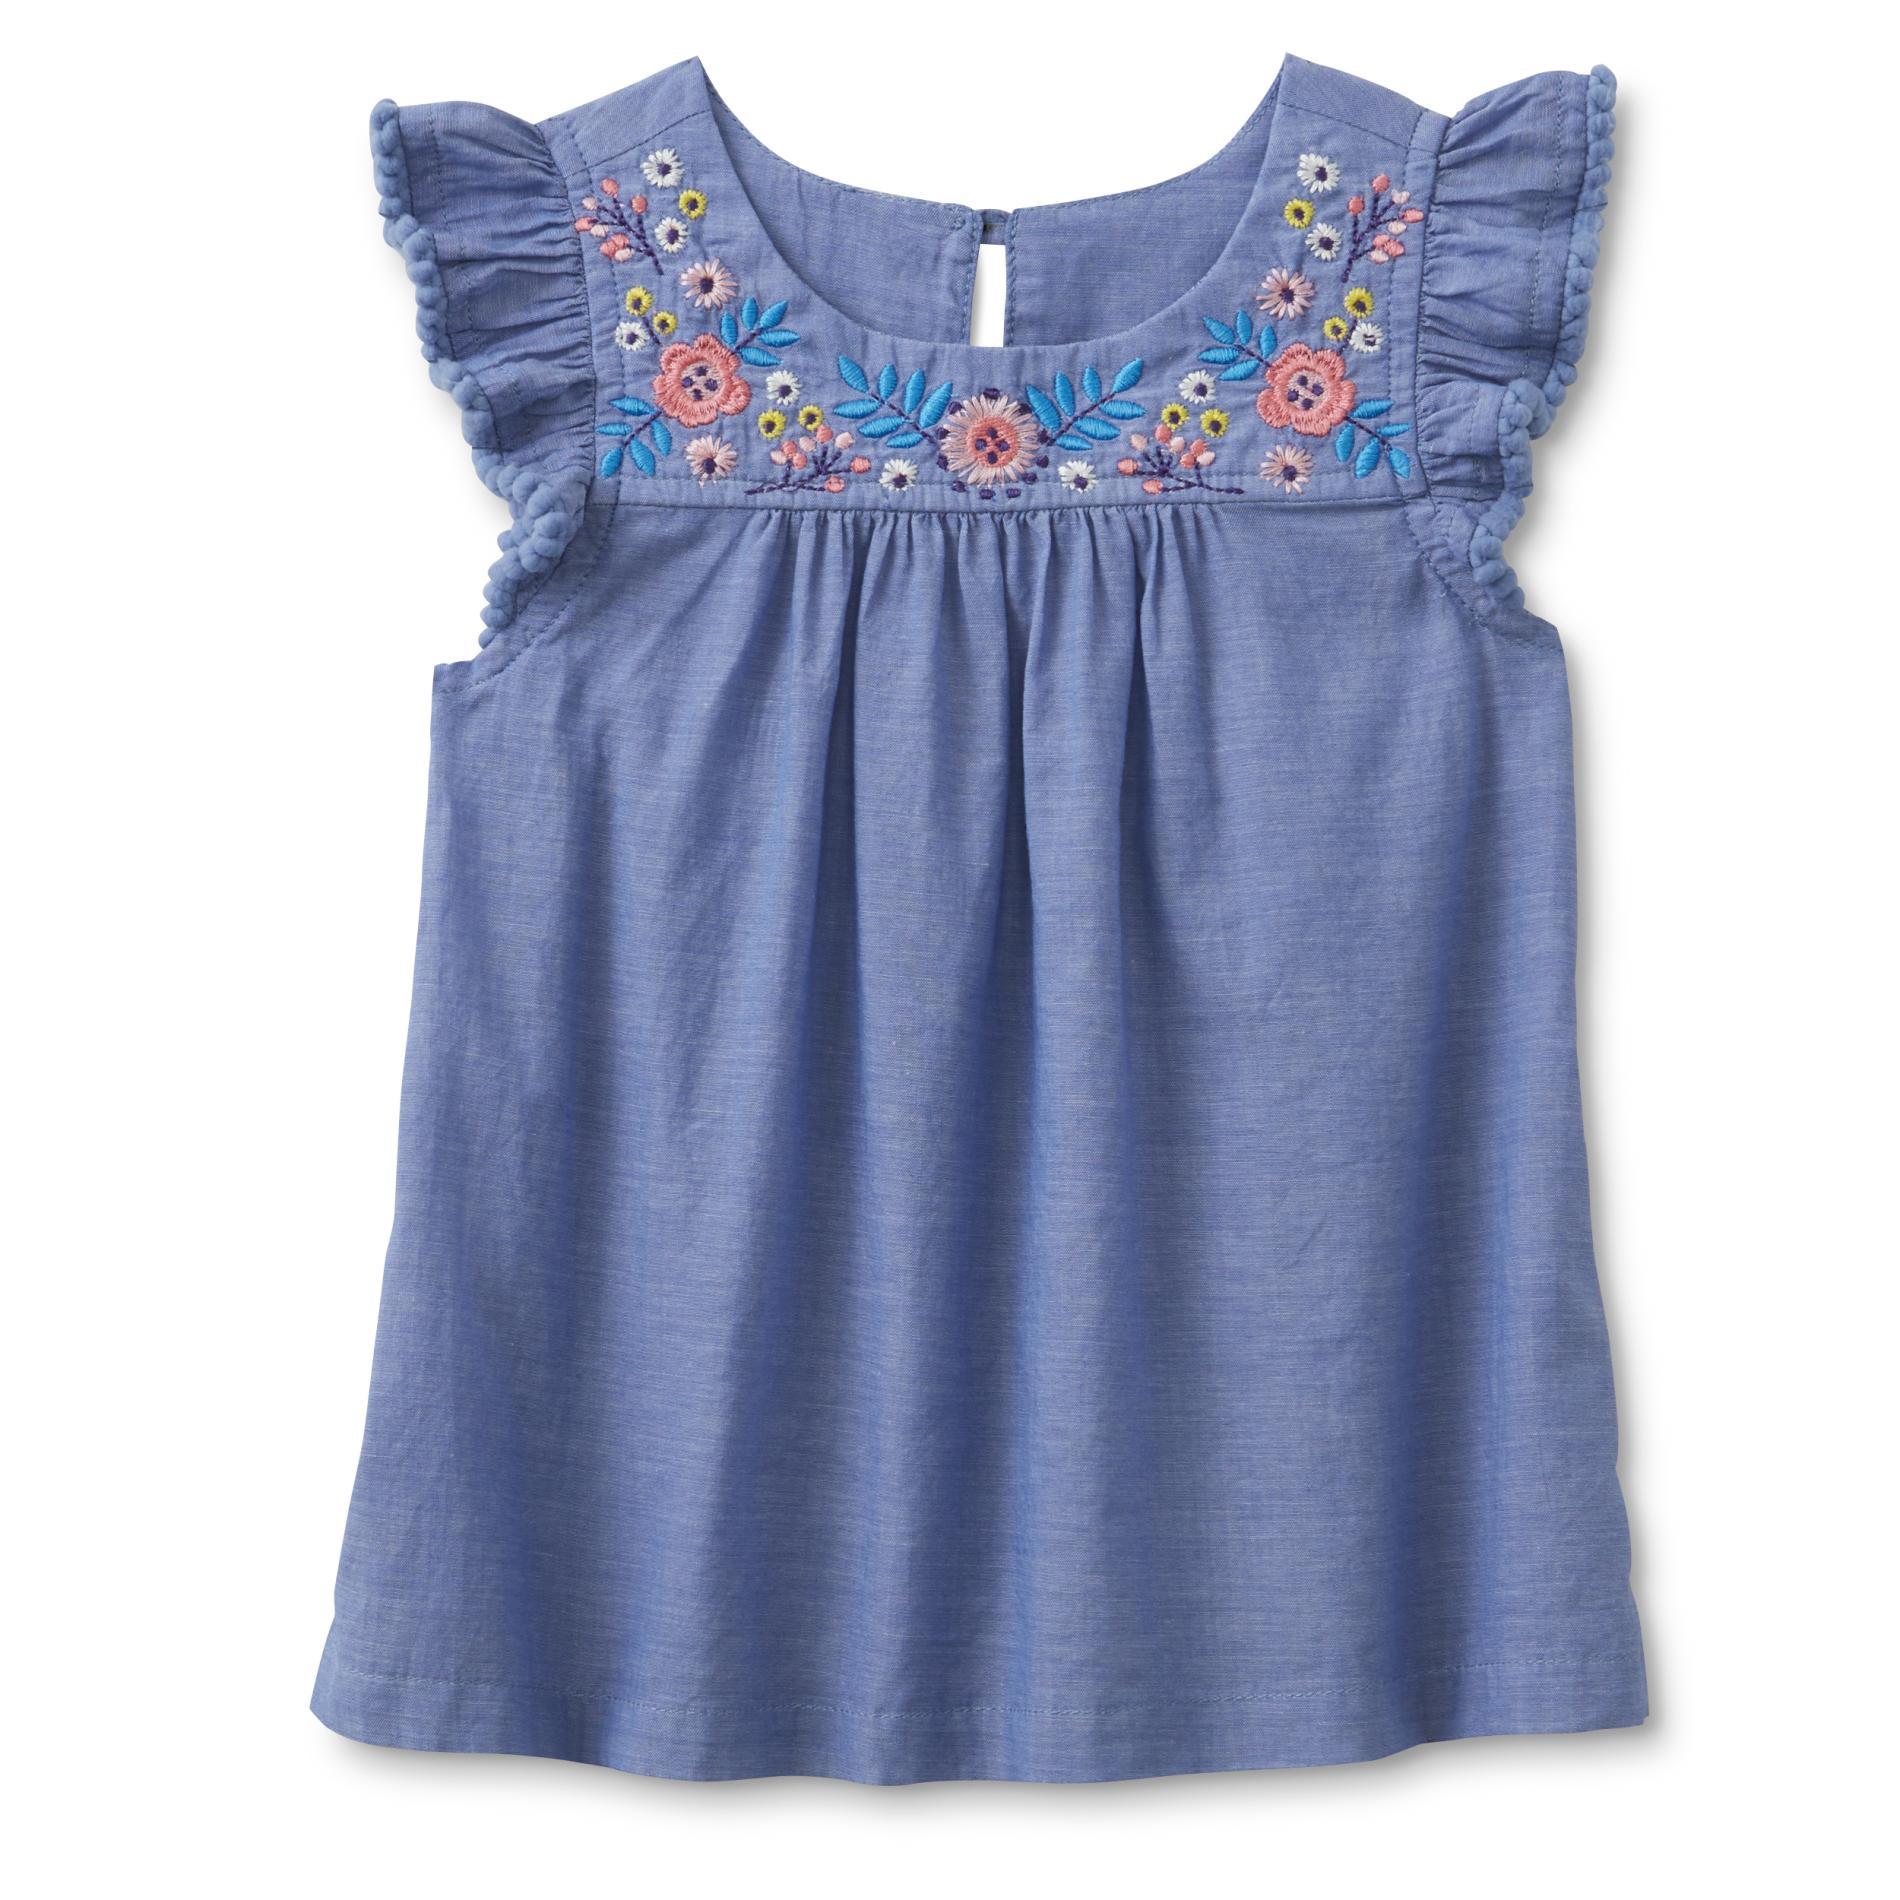 Toughskins Infant & Toddler Girl's Cap Sleeve Top - Embroidered